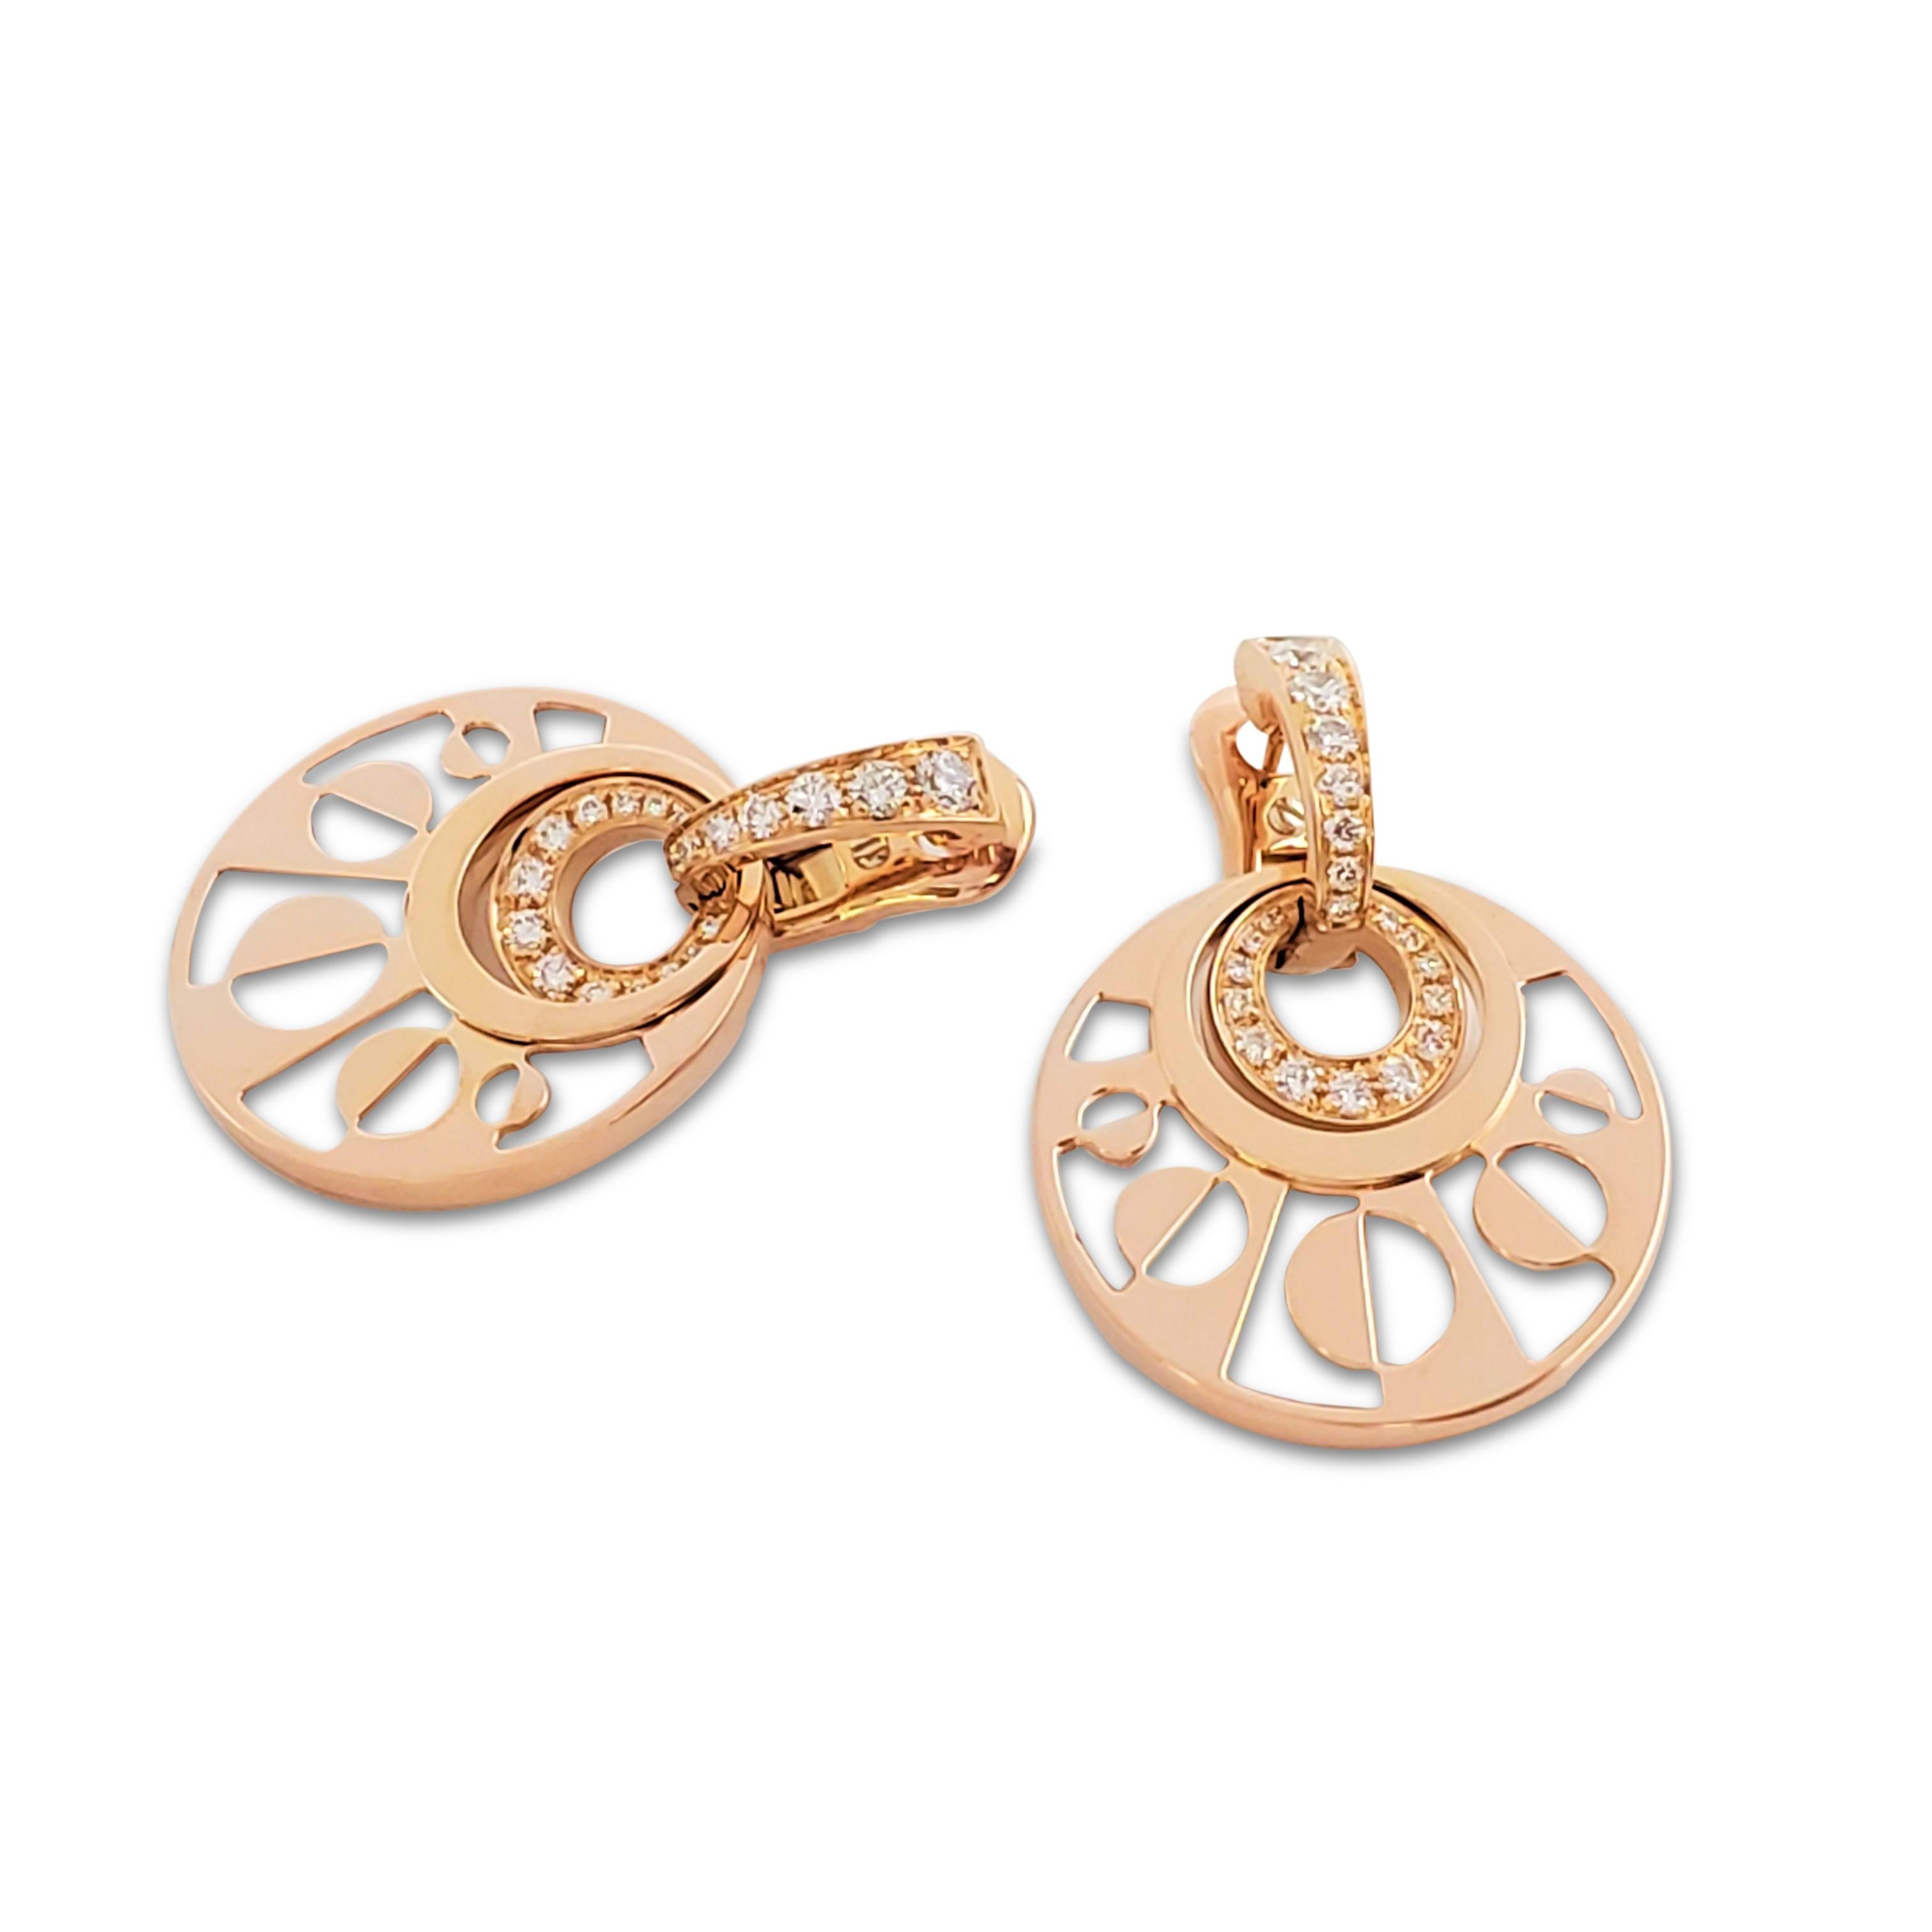 Authentic elegant Bvlgari 'Intarsio' pendant earrings from the 'Mediterranean Eden' collection crafted in18 karat rose gold. The earrings center on round mother-of-pearl inlaid geometric motifs set with pavé round brilliant cut diamonds weighing an